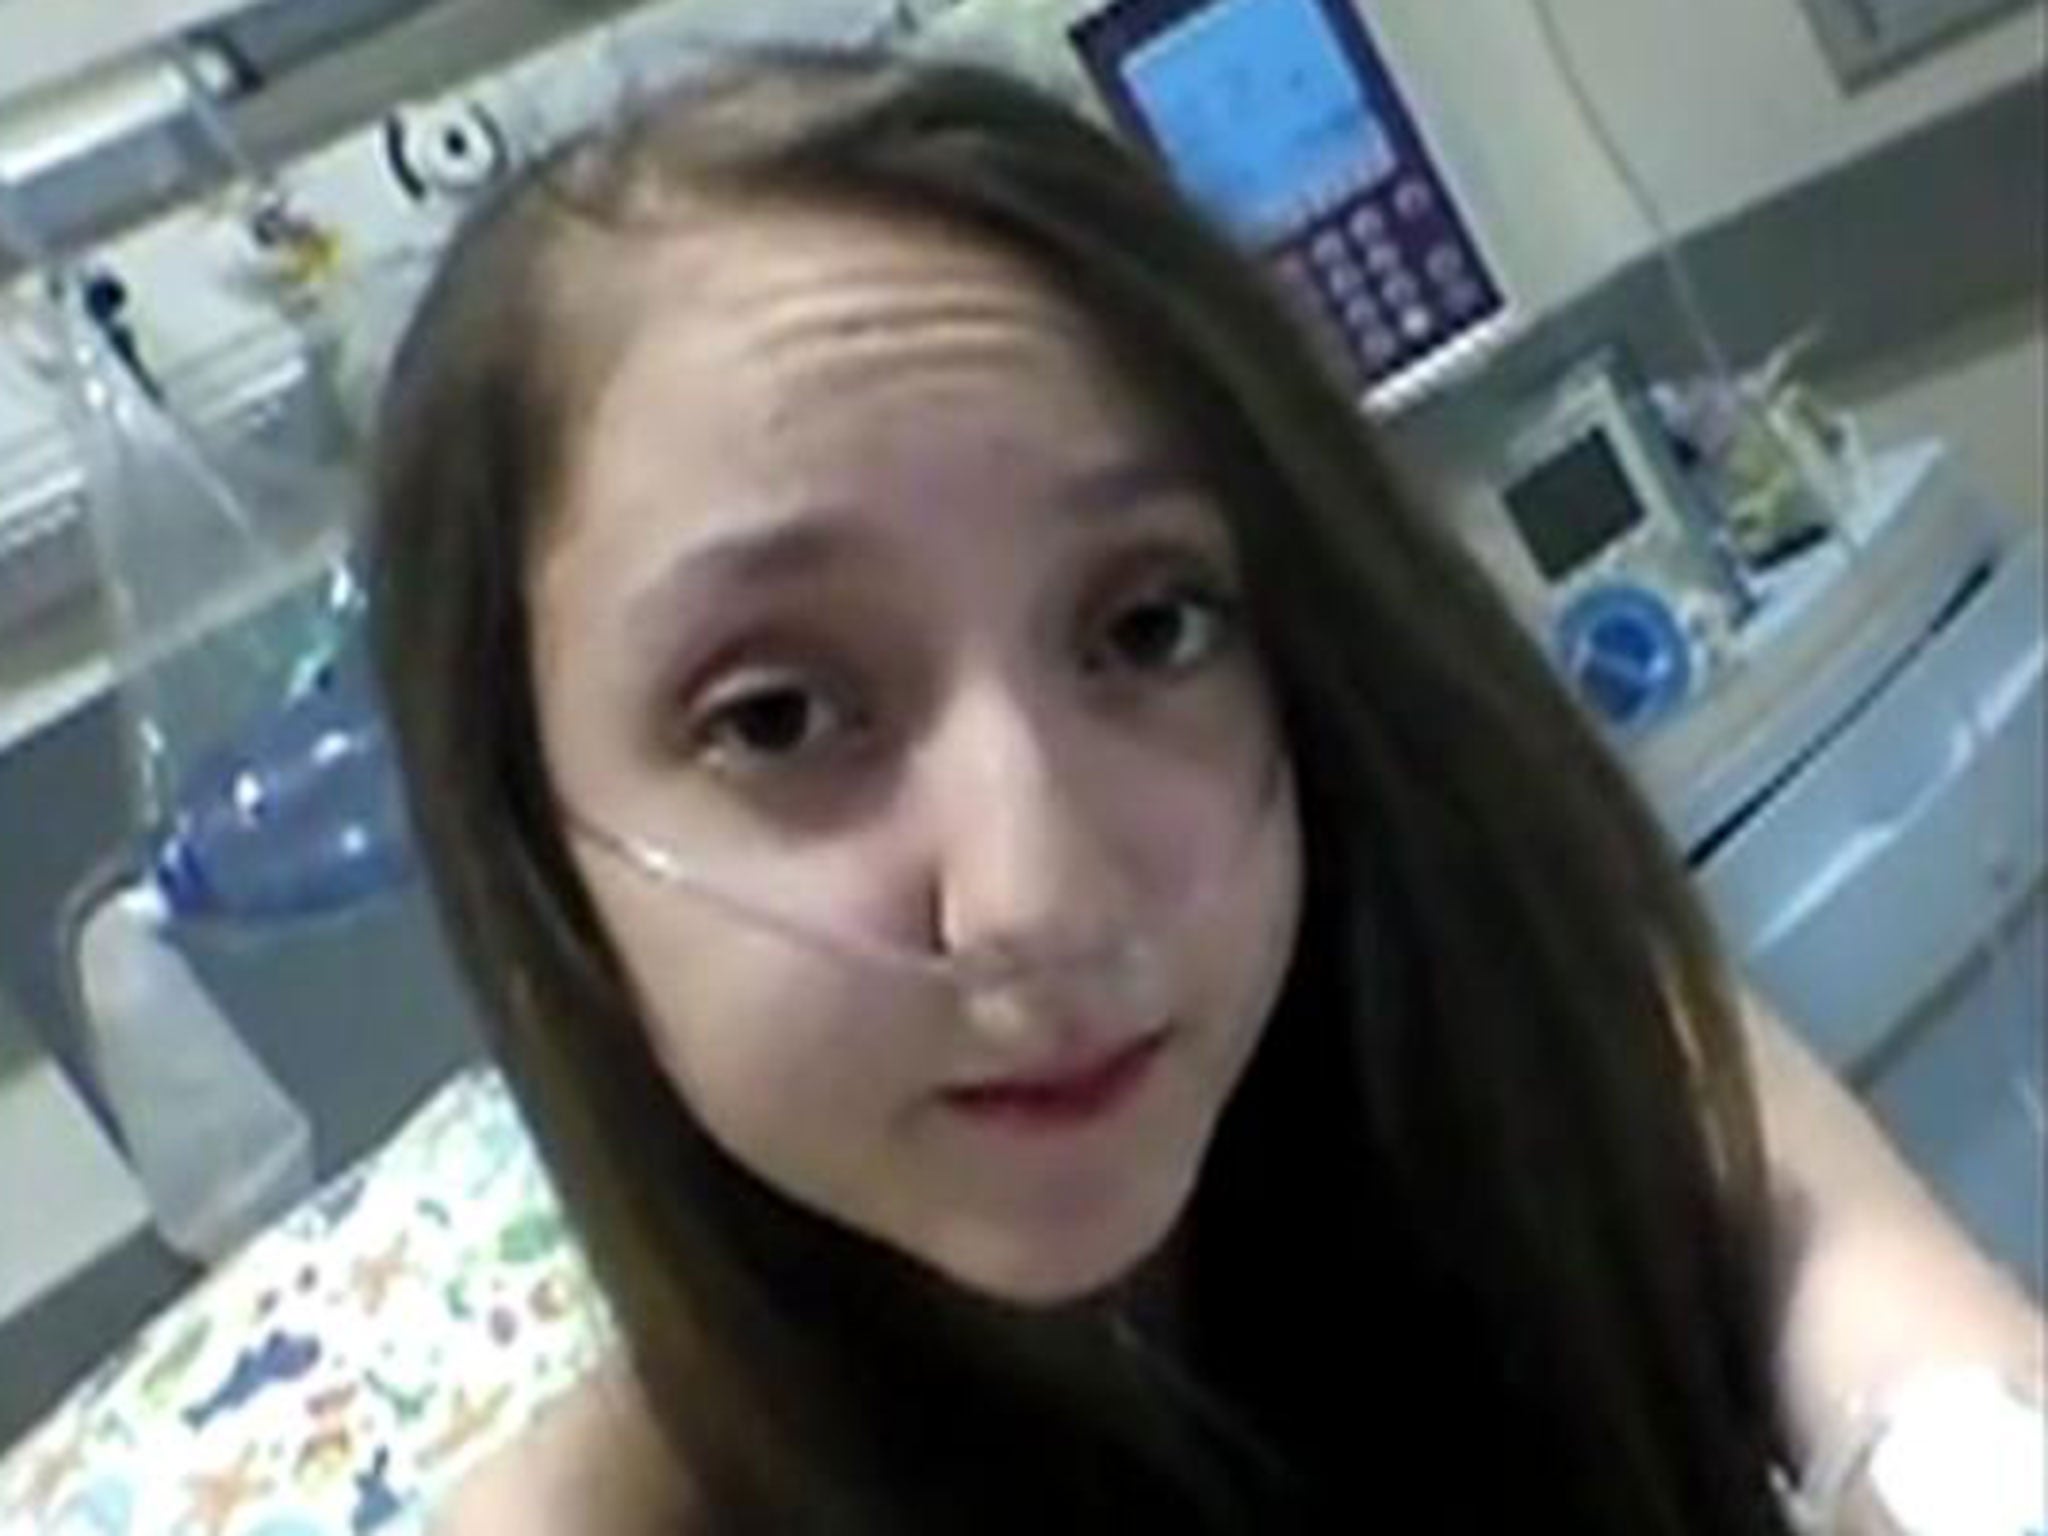 Chile Refuses 14 Year Old Girl S Plea To Be Allowed To Die Because Of Cystic Fibrosis Struggle